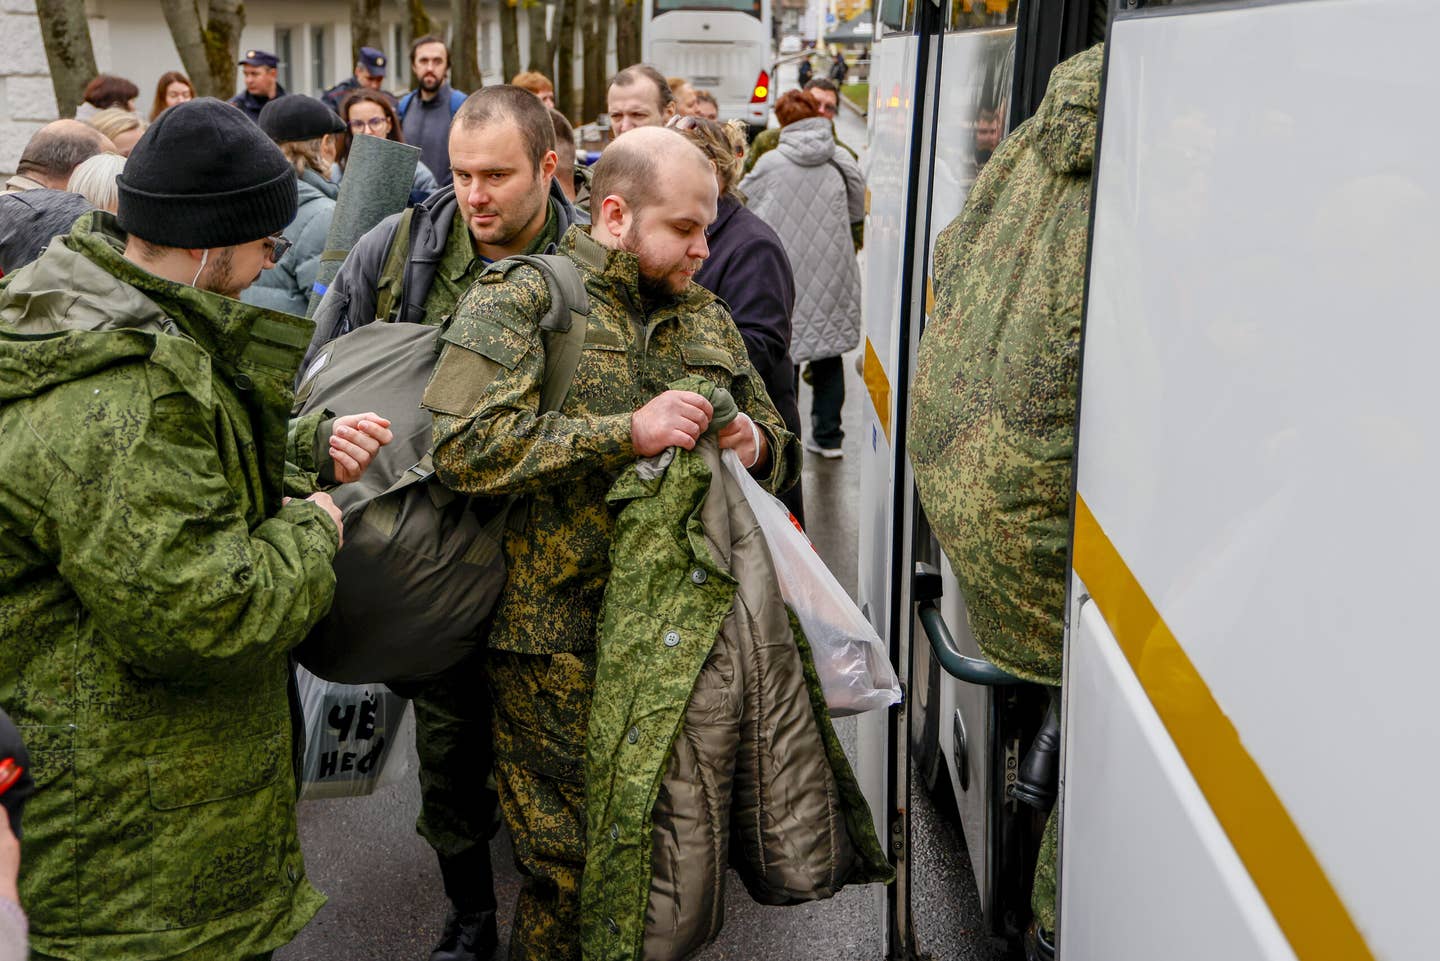 Russian recruits gather outside a military processing center as drafted men say goodbye to their families before departing from their town in Moscow, in October 2022. <em>Photo by Sefa Karacan/Anadolu Agency via Getty Images</em>